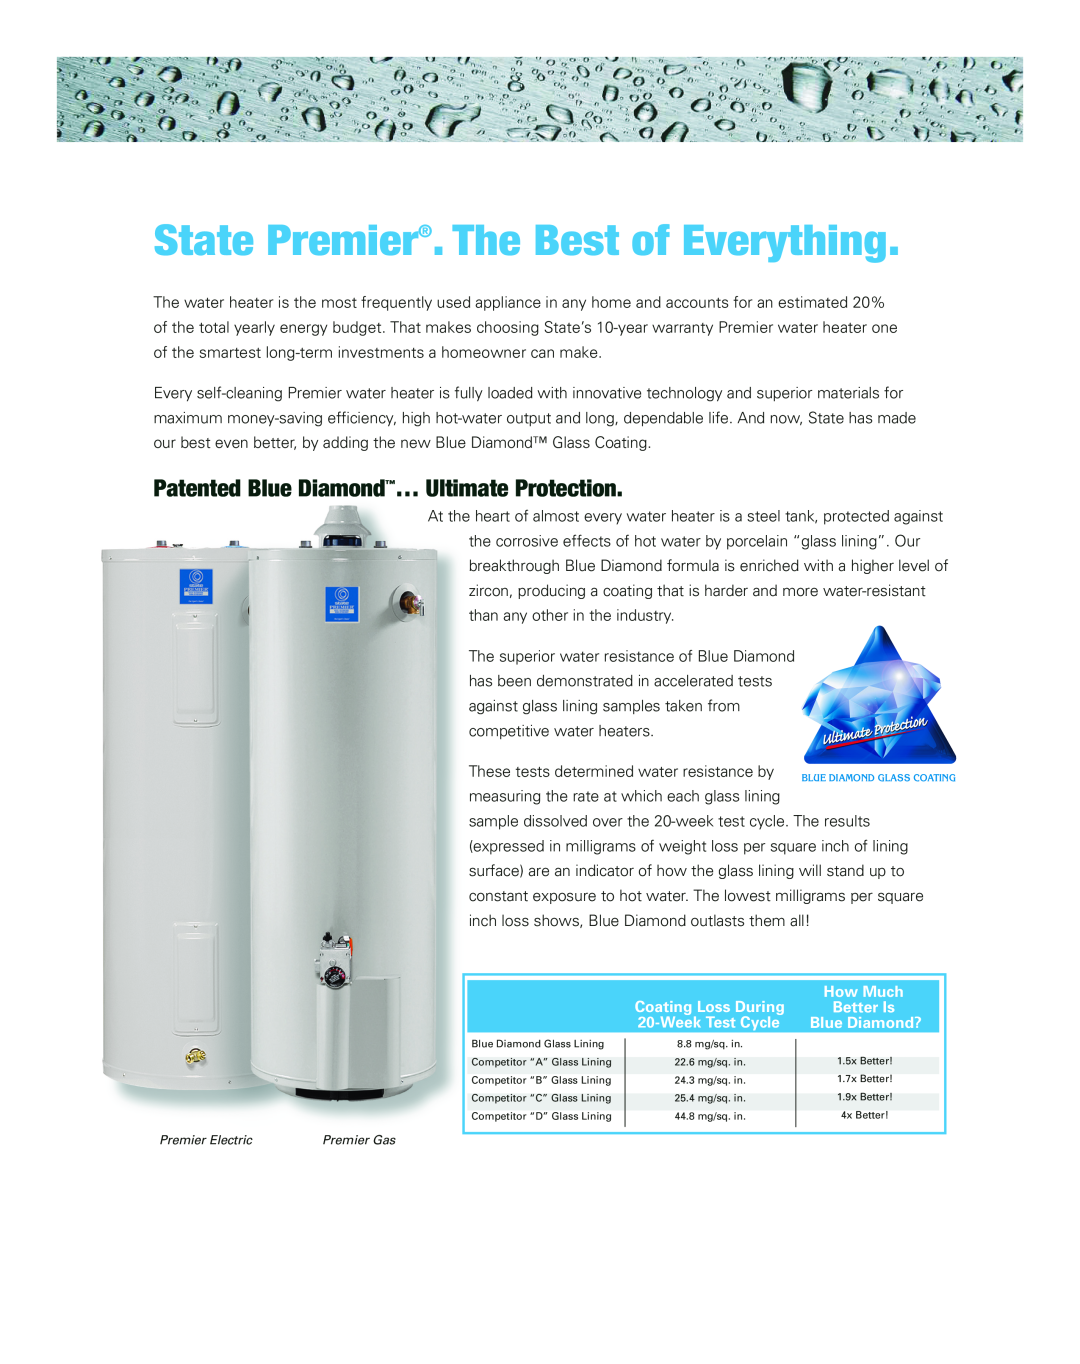 State Industries Residential Water Heaters manual Coating Loss During, How Much, Better Is, Blue Diamond? 